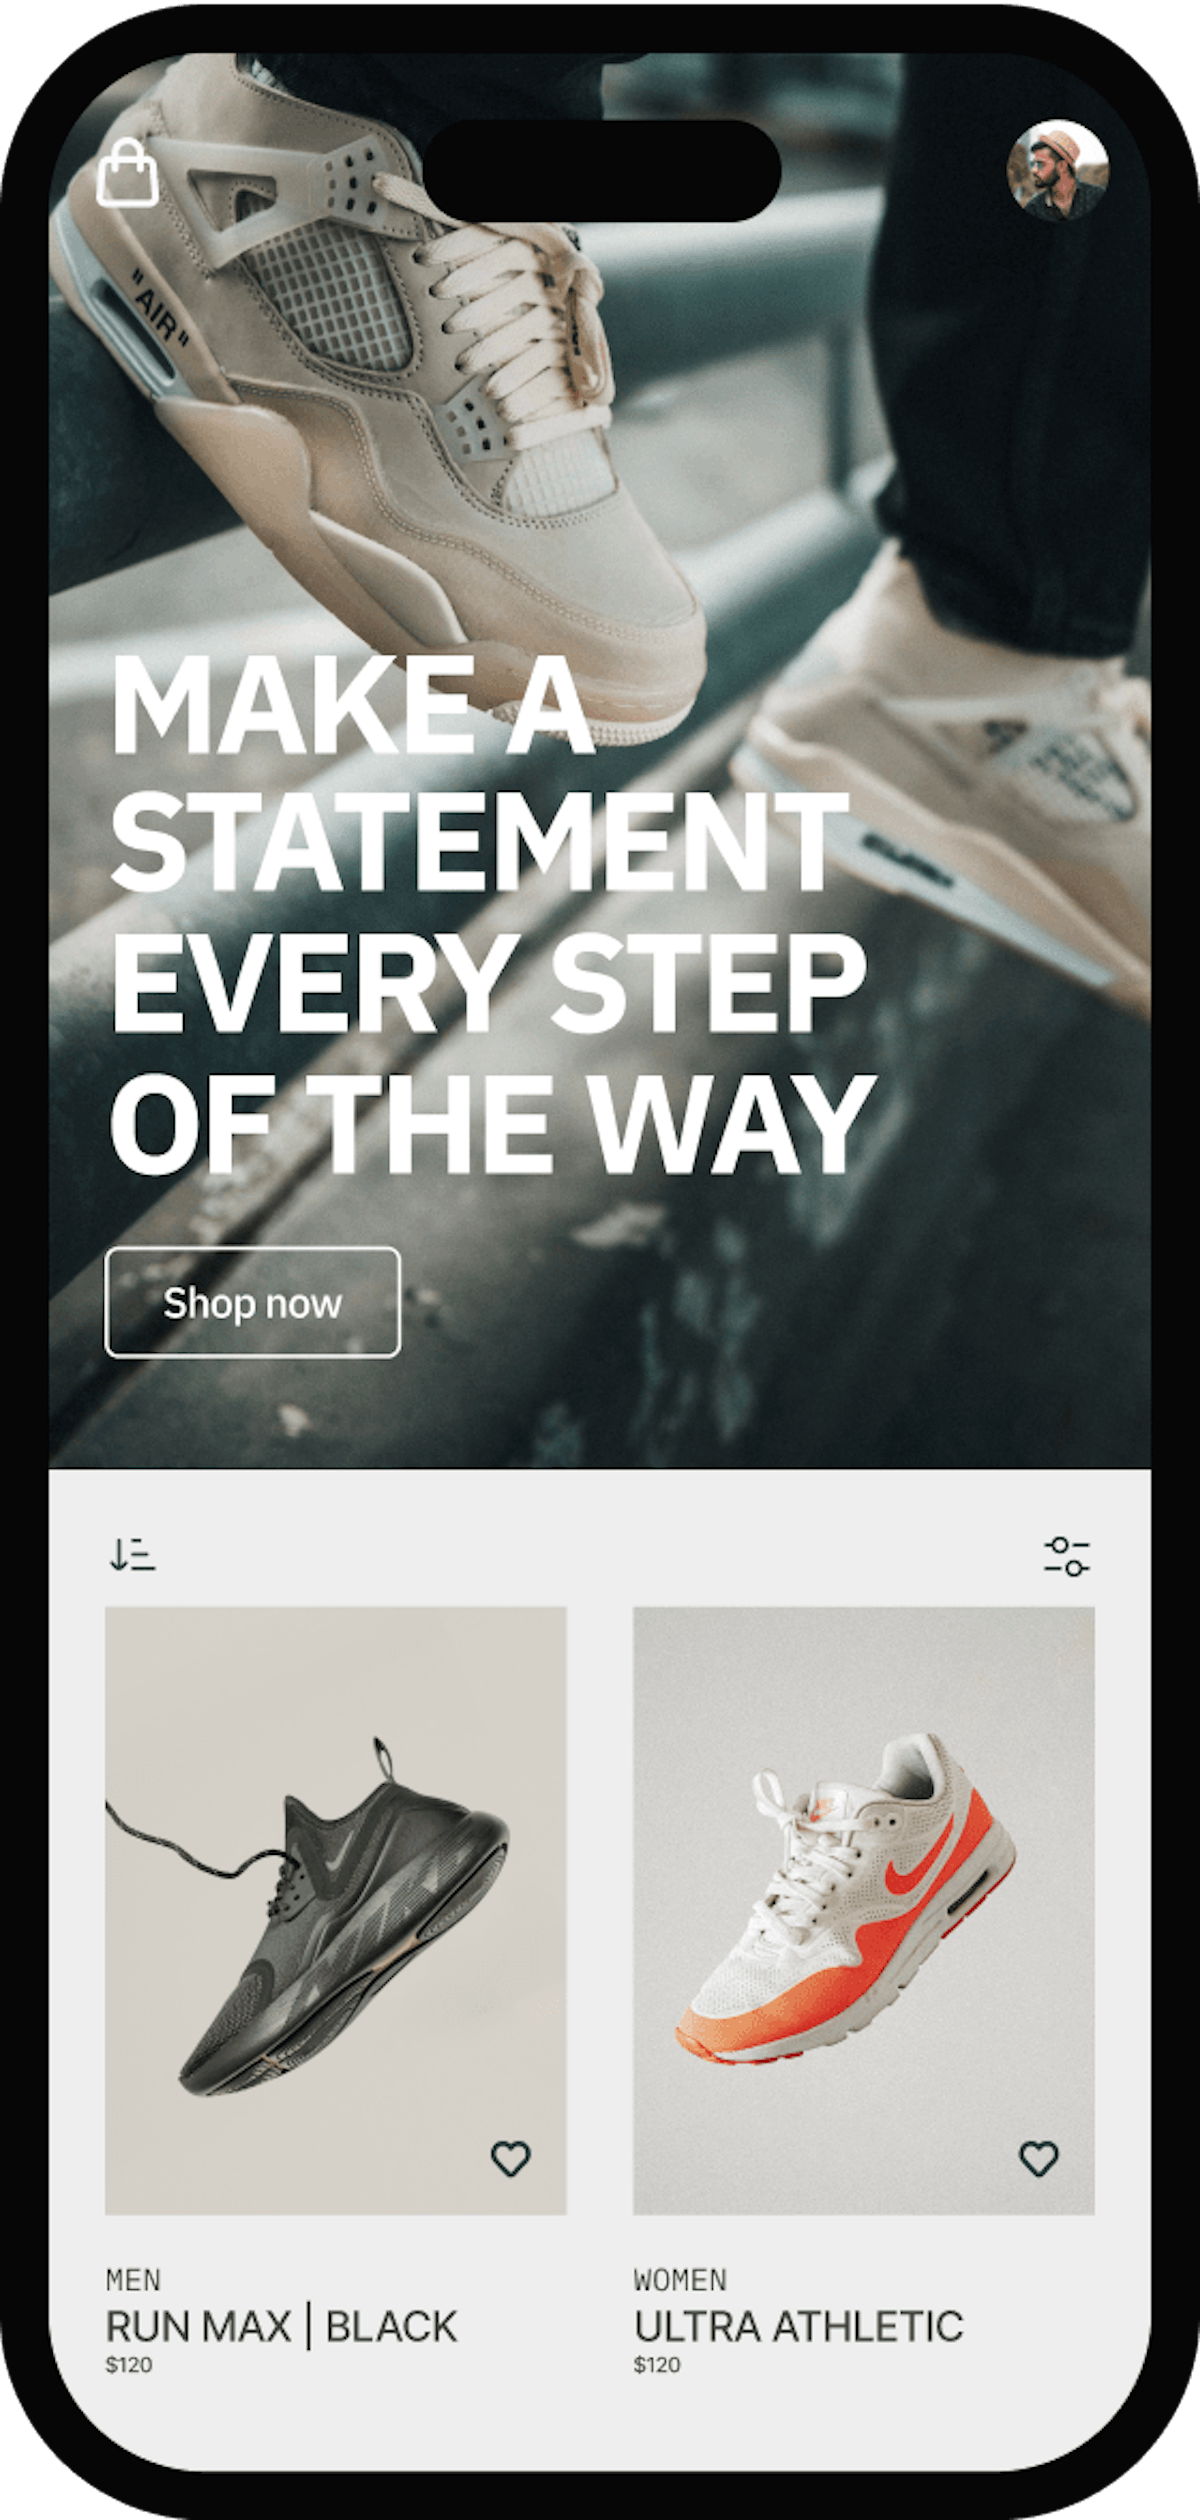 Using Cohere to generate marketing slogans for an online shoe shop